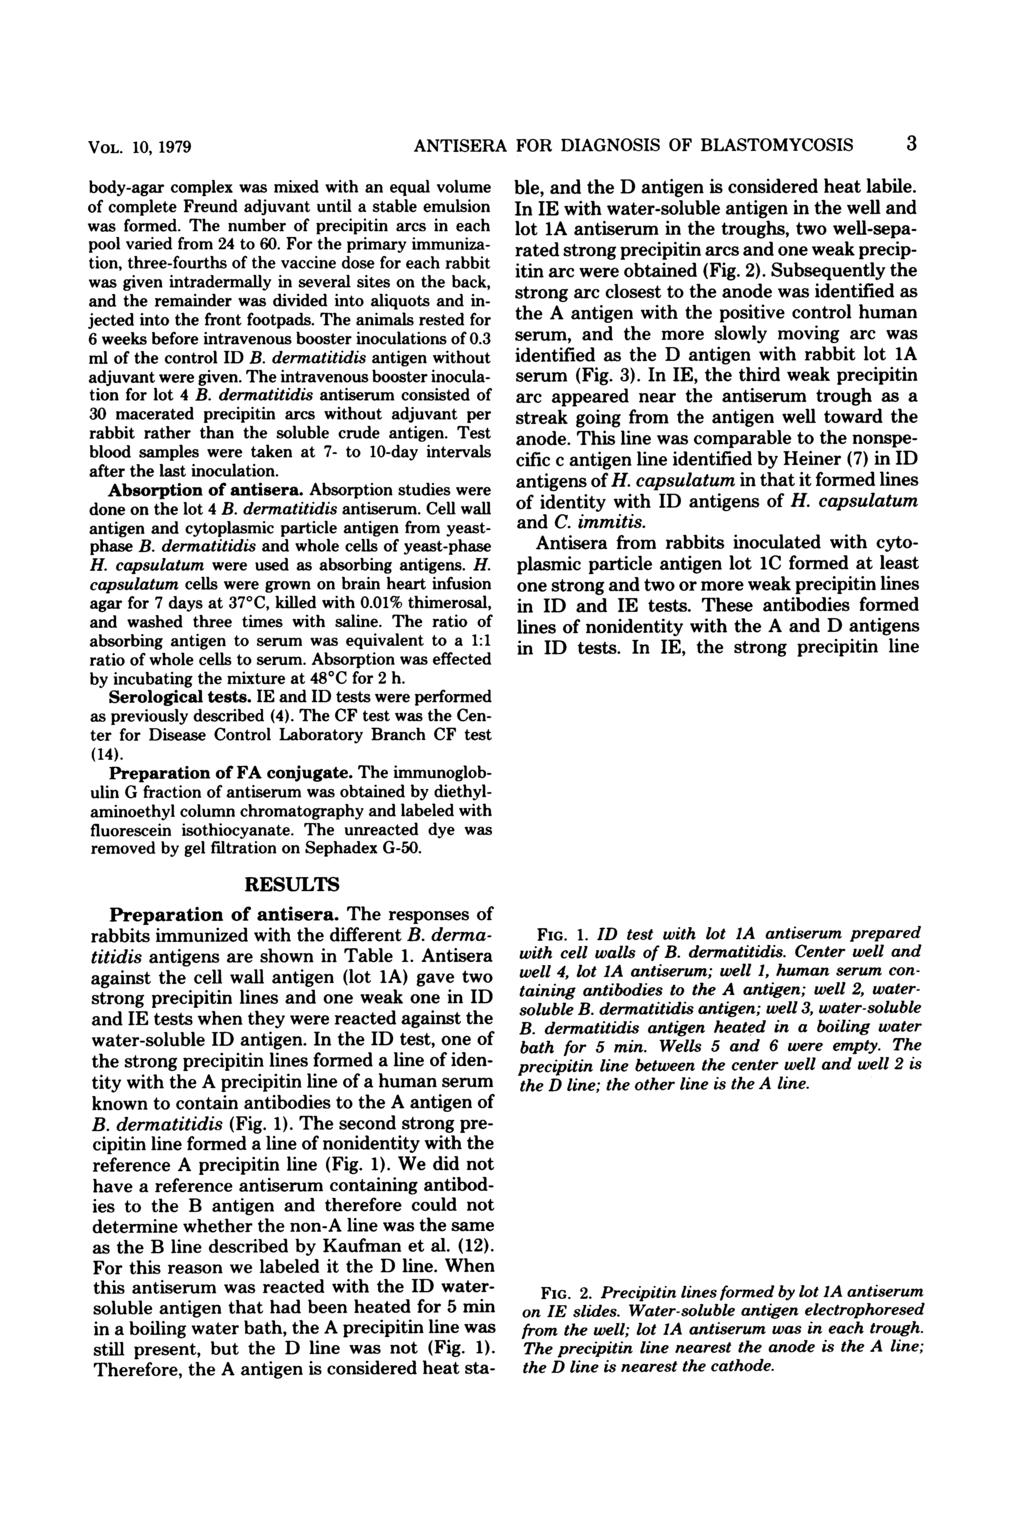 VOL. 10, 1979 body-agar complex was mixed with an equal volume of complete Freund adjuvant until a stable emulsion was formed. The number of precipitin arcs in each pool varied from 24 to 60.